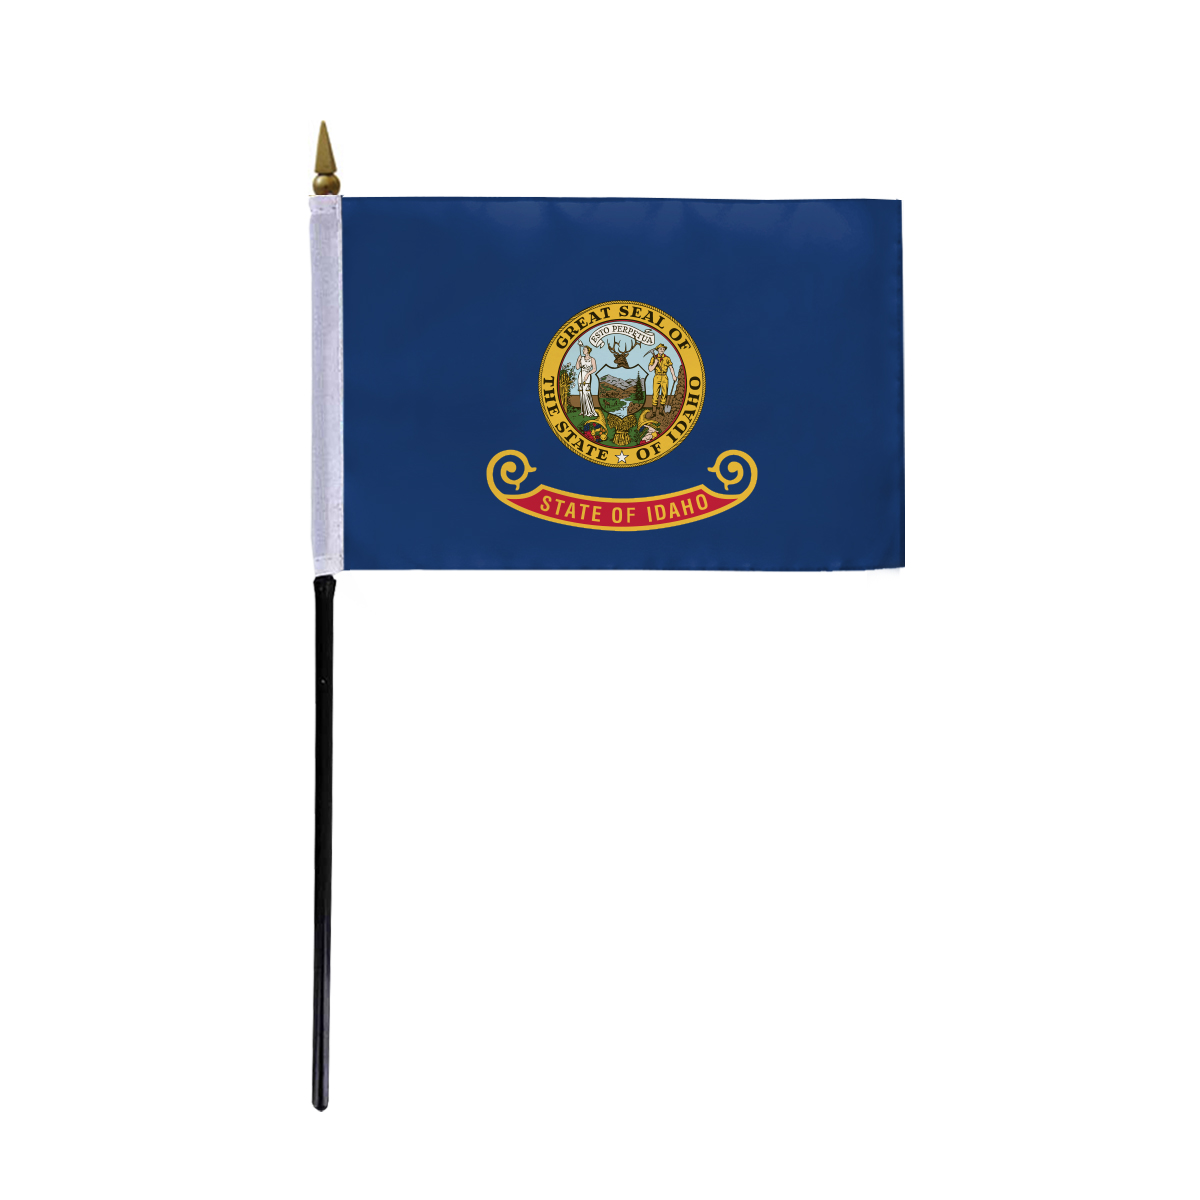 AGAS Idaho Stick Flag 4x6 Inch with 11 inch Plastic Pole - Printed Polyester